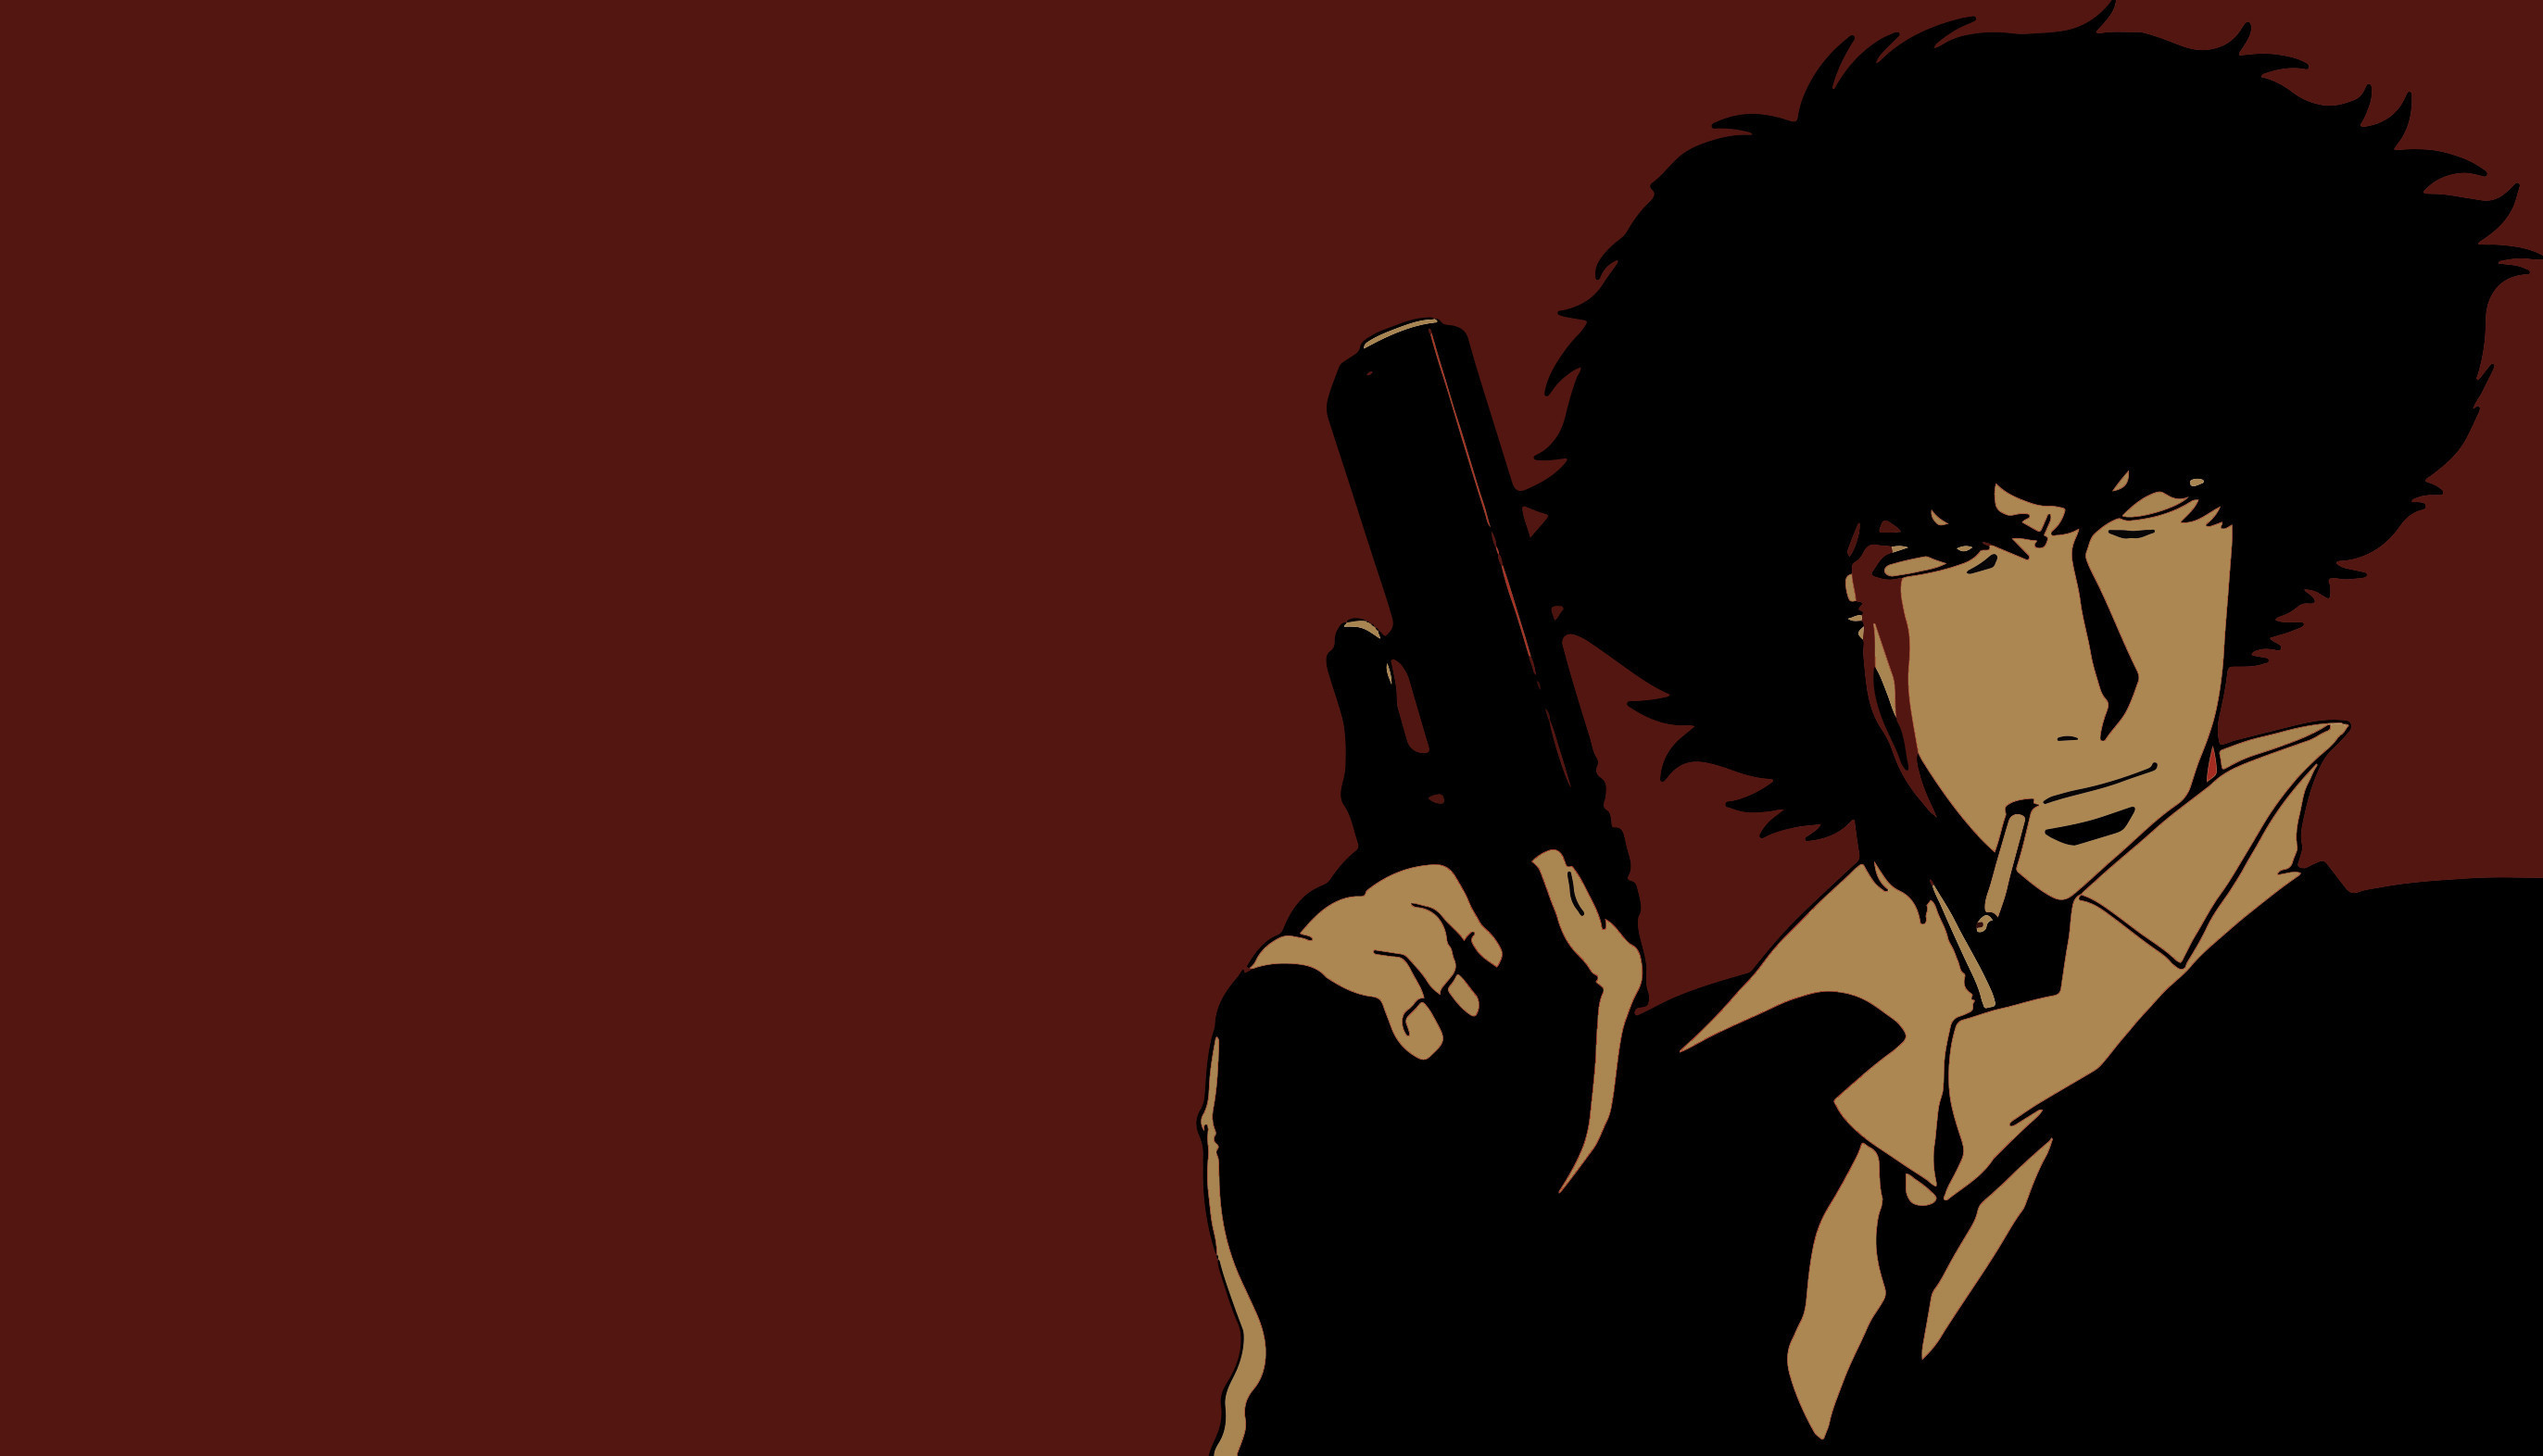 2745x1572 299 Cowboy Bebop HD Wallpapers | Backgrounds - Wallpaper Abyss - Page 10